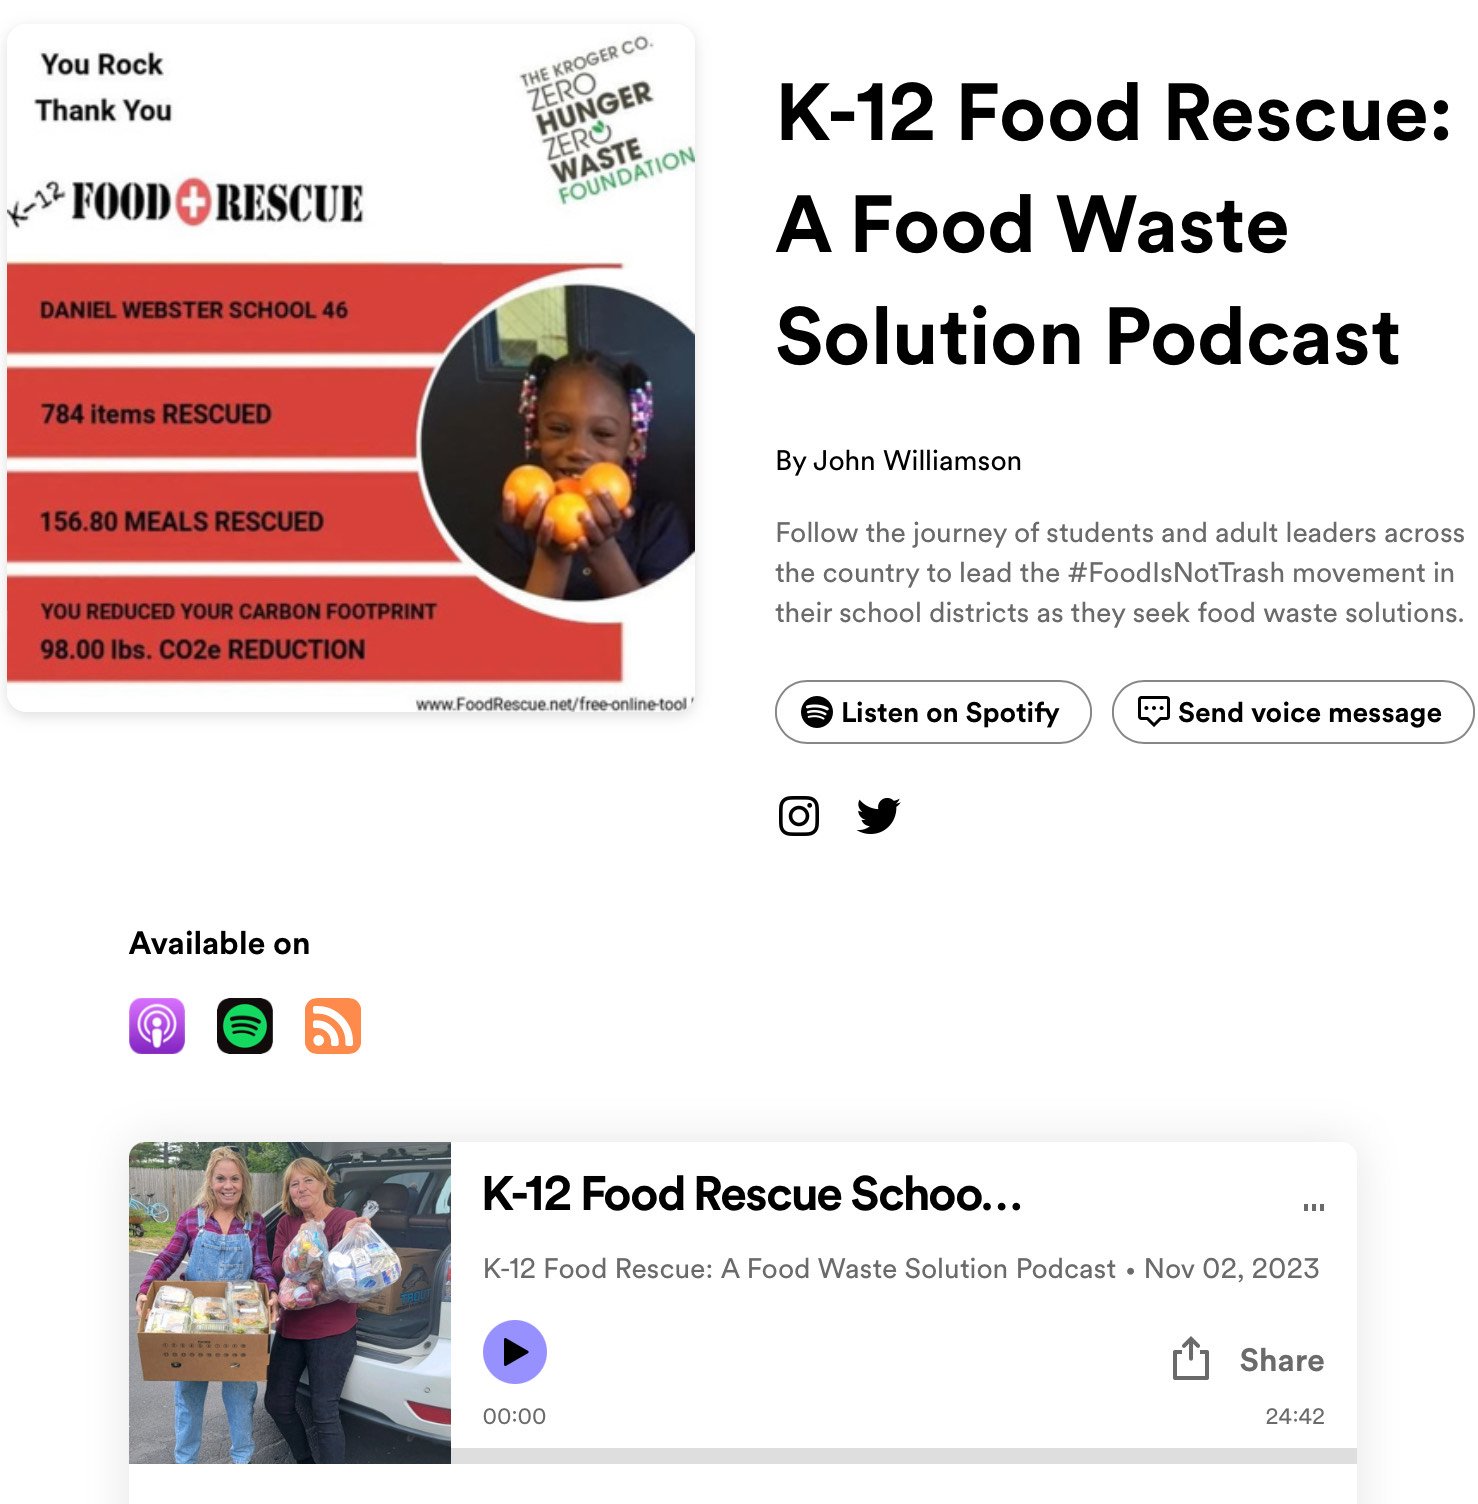  Image:  from K-12 Food Rescue Solution Podcase website 